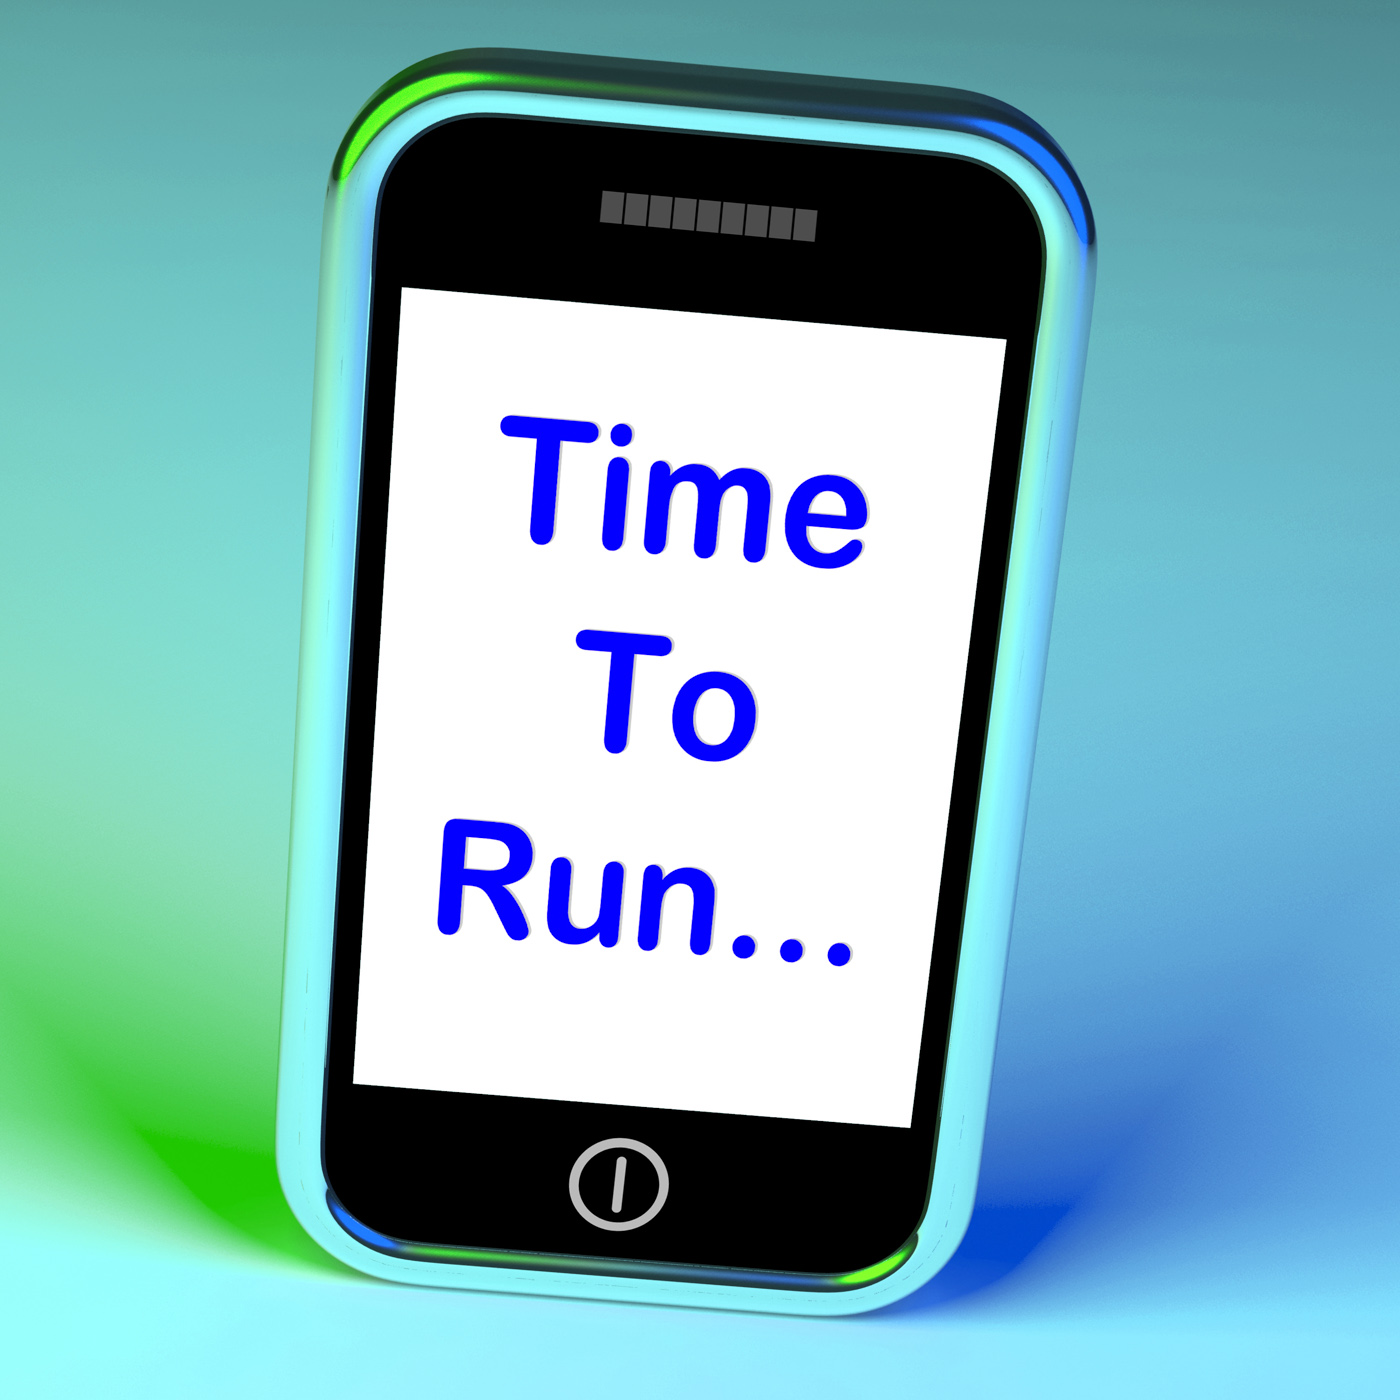 Time to run smartphone means short on time and rushing photo